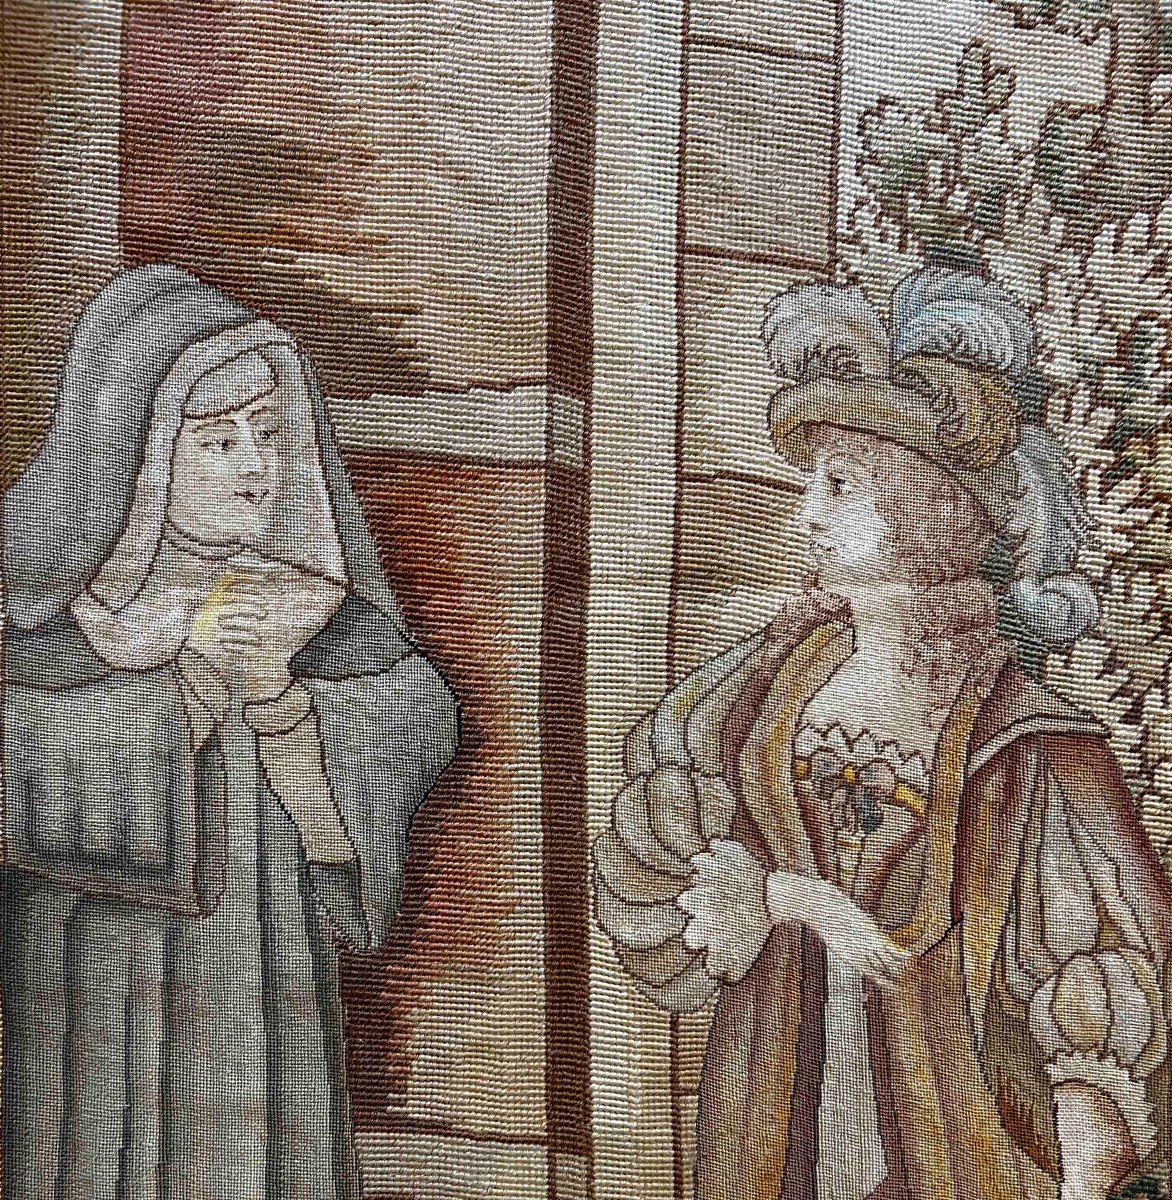 Aubusson Tapestry Au Petit Point "wishes Welcome To Saint Rita" - 2m90x1m47 - No. 969-photo-3